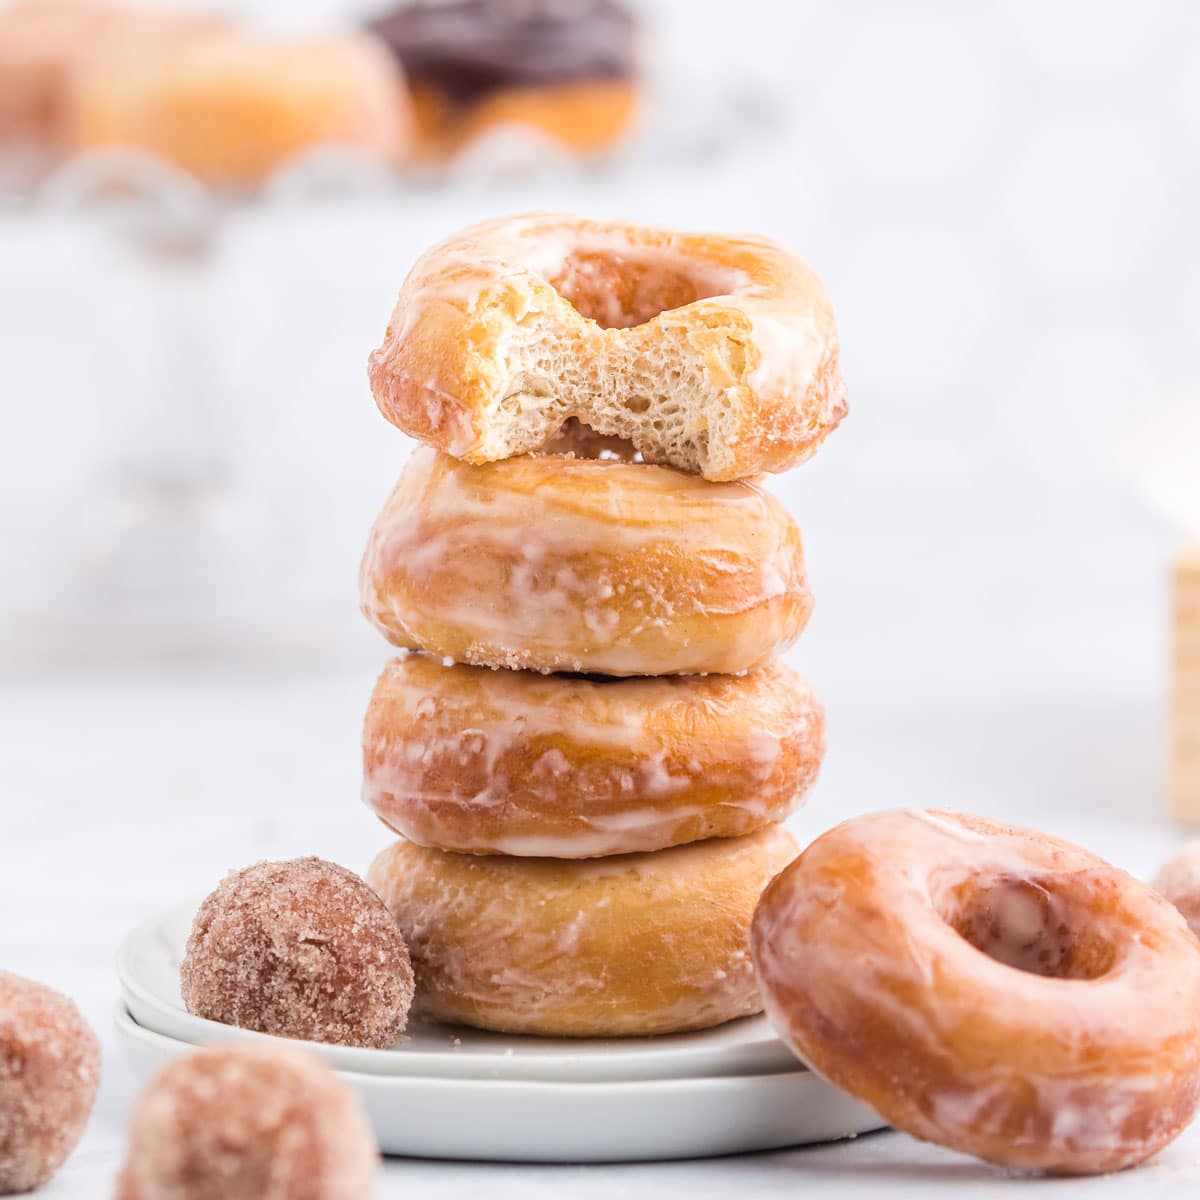 A stack of glazed, raised donuts on a plate.